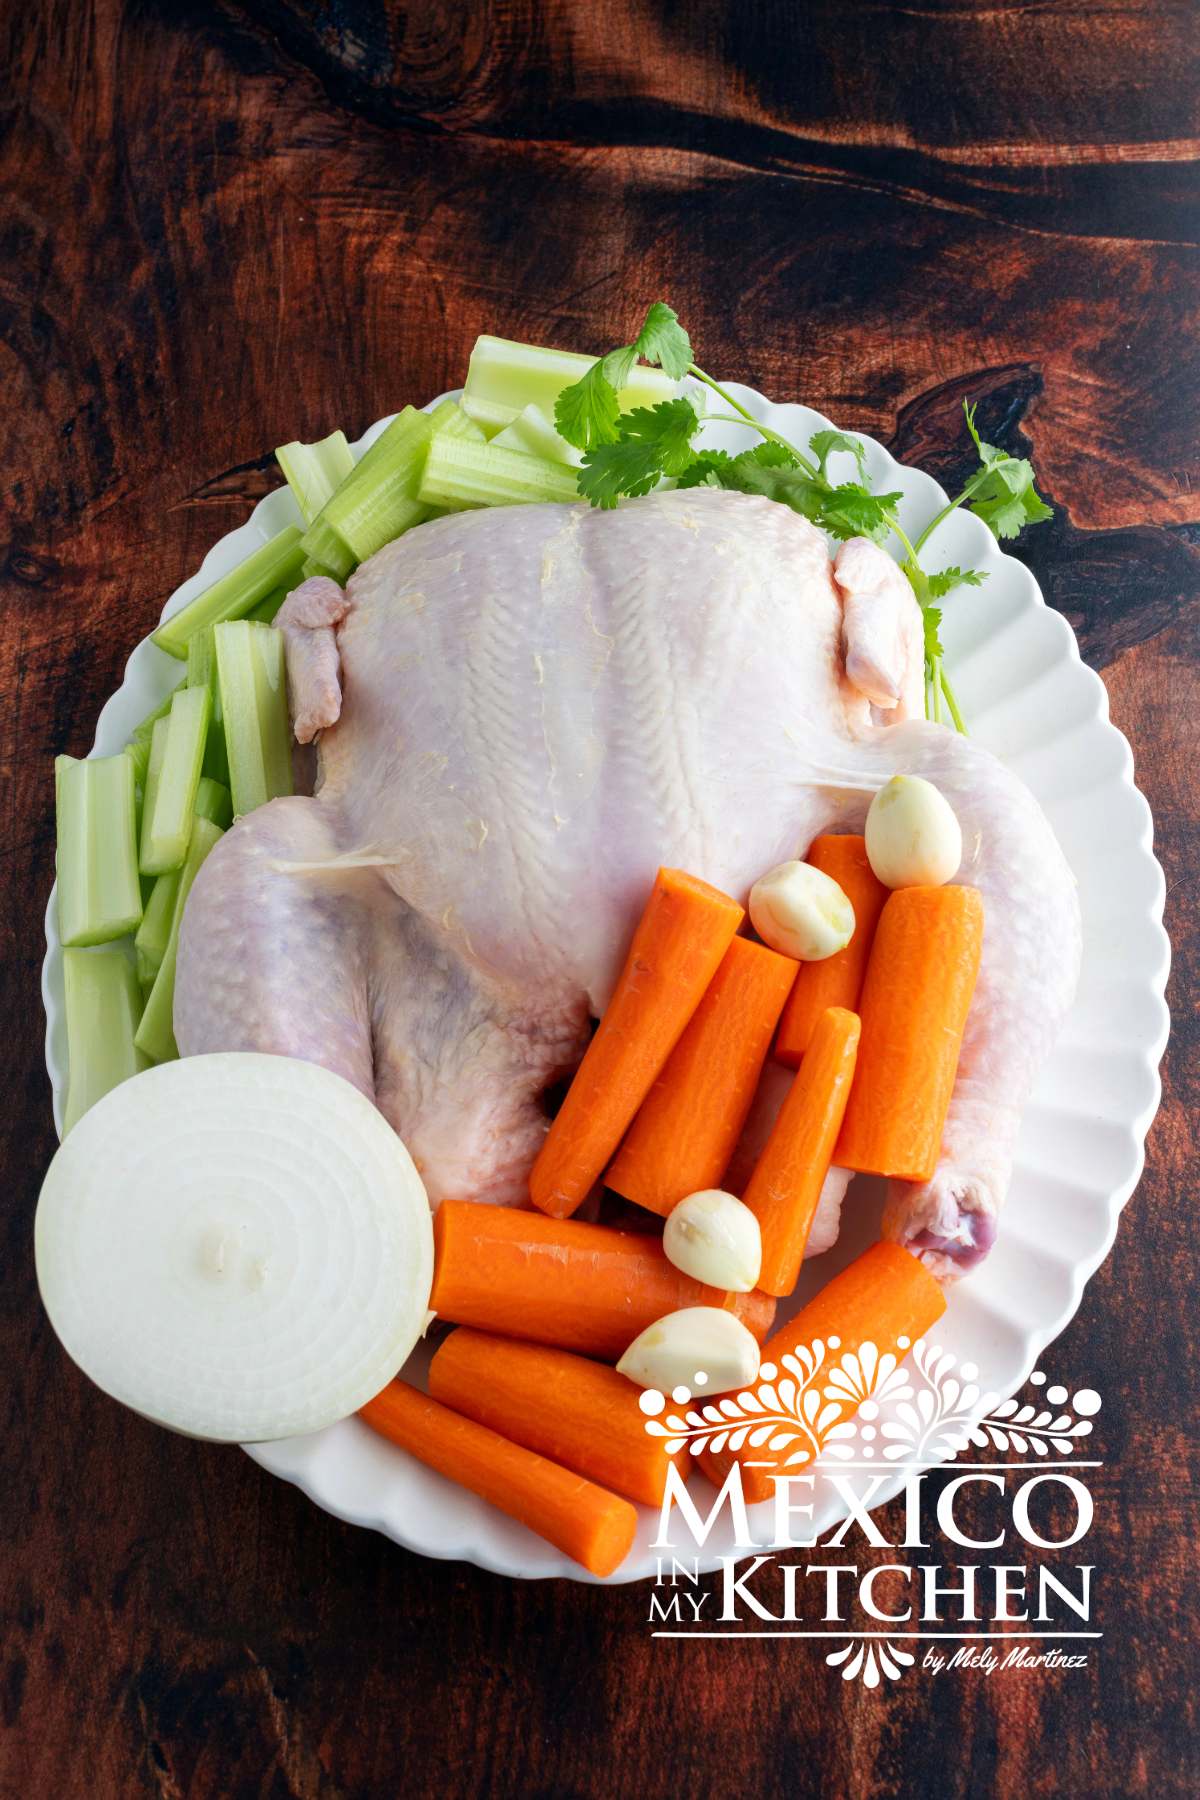 Raw whole chicken, carrots, celery, white onion, cilantro, and garlic cloves served in platter.